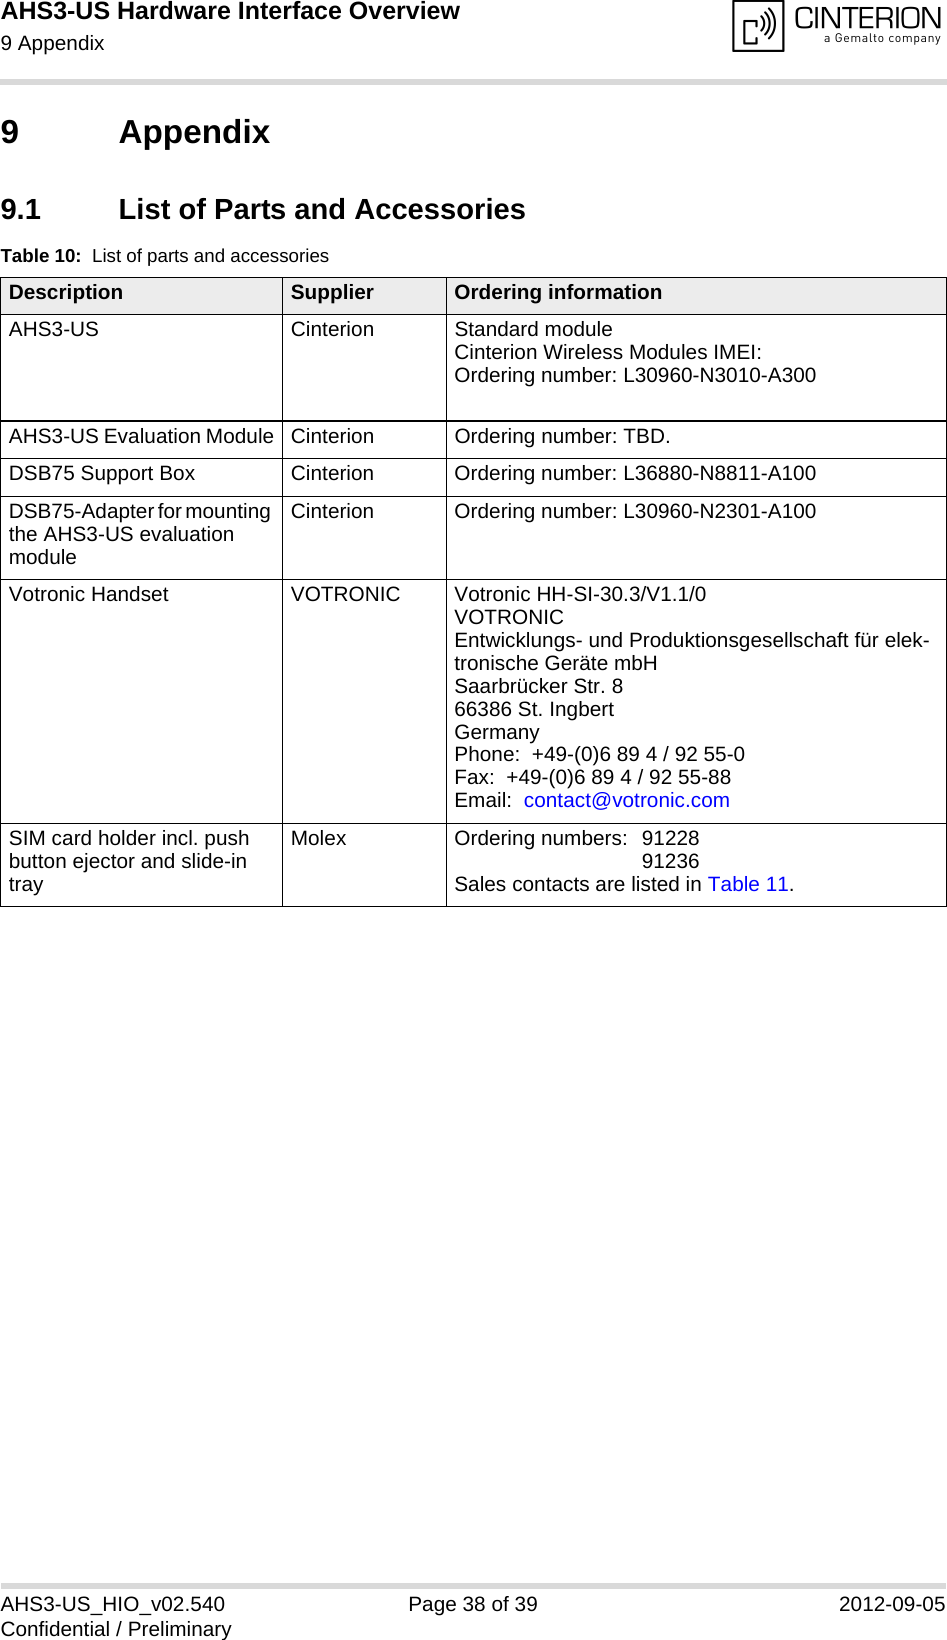 AHS3-US Hardware Interface Overview9 Appendix39AHS3-US_HIO_v02.540 Page 38 of 39 2012-09-05Confidential / Preliminary9 Appendix9.1 List of Parts and AccessoriesTable 10:  List of parts and accessoriesDescription Supplier Ordering informationAHS3-US Cinterion Standard module Cinterion Wireless Modules IMEI:Ordering number: L30960-N3010-A300AHS3-US Evaluation Module Cinterion Ordering number: TBD.DSB75 Support Box Cinterion Ordering number: L36880-N8811-A100DSB75-Adapter for mounting the AHS3-US evaluation moduleCinterion Ordering number: L30960-N2301-A100Votronic Handset VOTRONIC Votronic HH-SI-30.3/V1.1/0VOTRONIC Entwicklungs- und Produktionsgesellschaft für elek-tronische Geräte mbHSaarbrücker Str. 866386 St. IngbertGermanyPhone:  +49-(0)6 89 4 / 92 55-0Fax:  +49-(0)6 89 4 / 92 55-88Email:  contact@votronic.comSIM card holder incl. push button ejector and slide-in trayMolex Ordering numbers:  91228 91236Sales contacts are listed in Table 11.